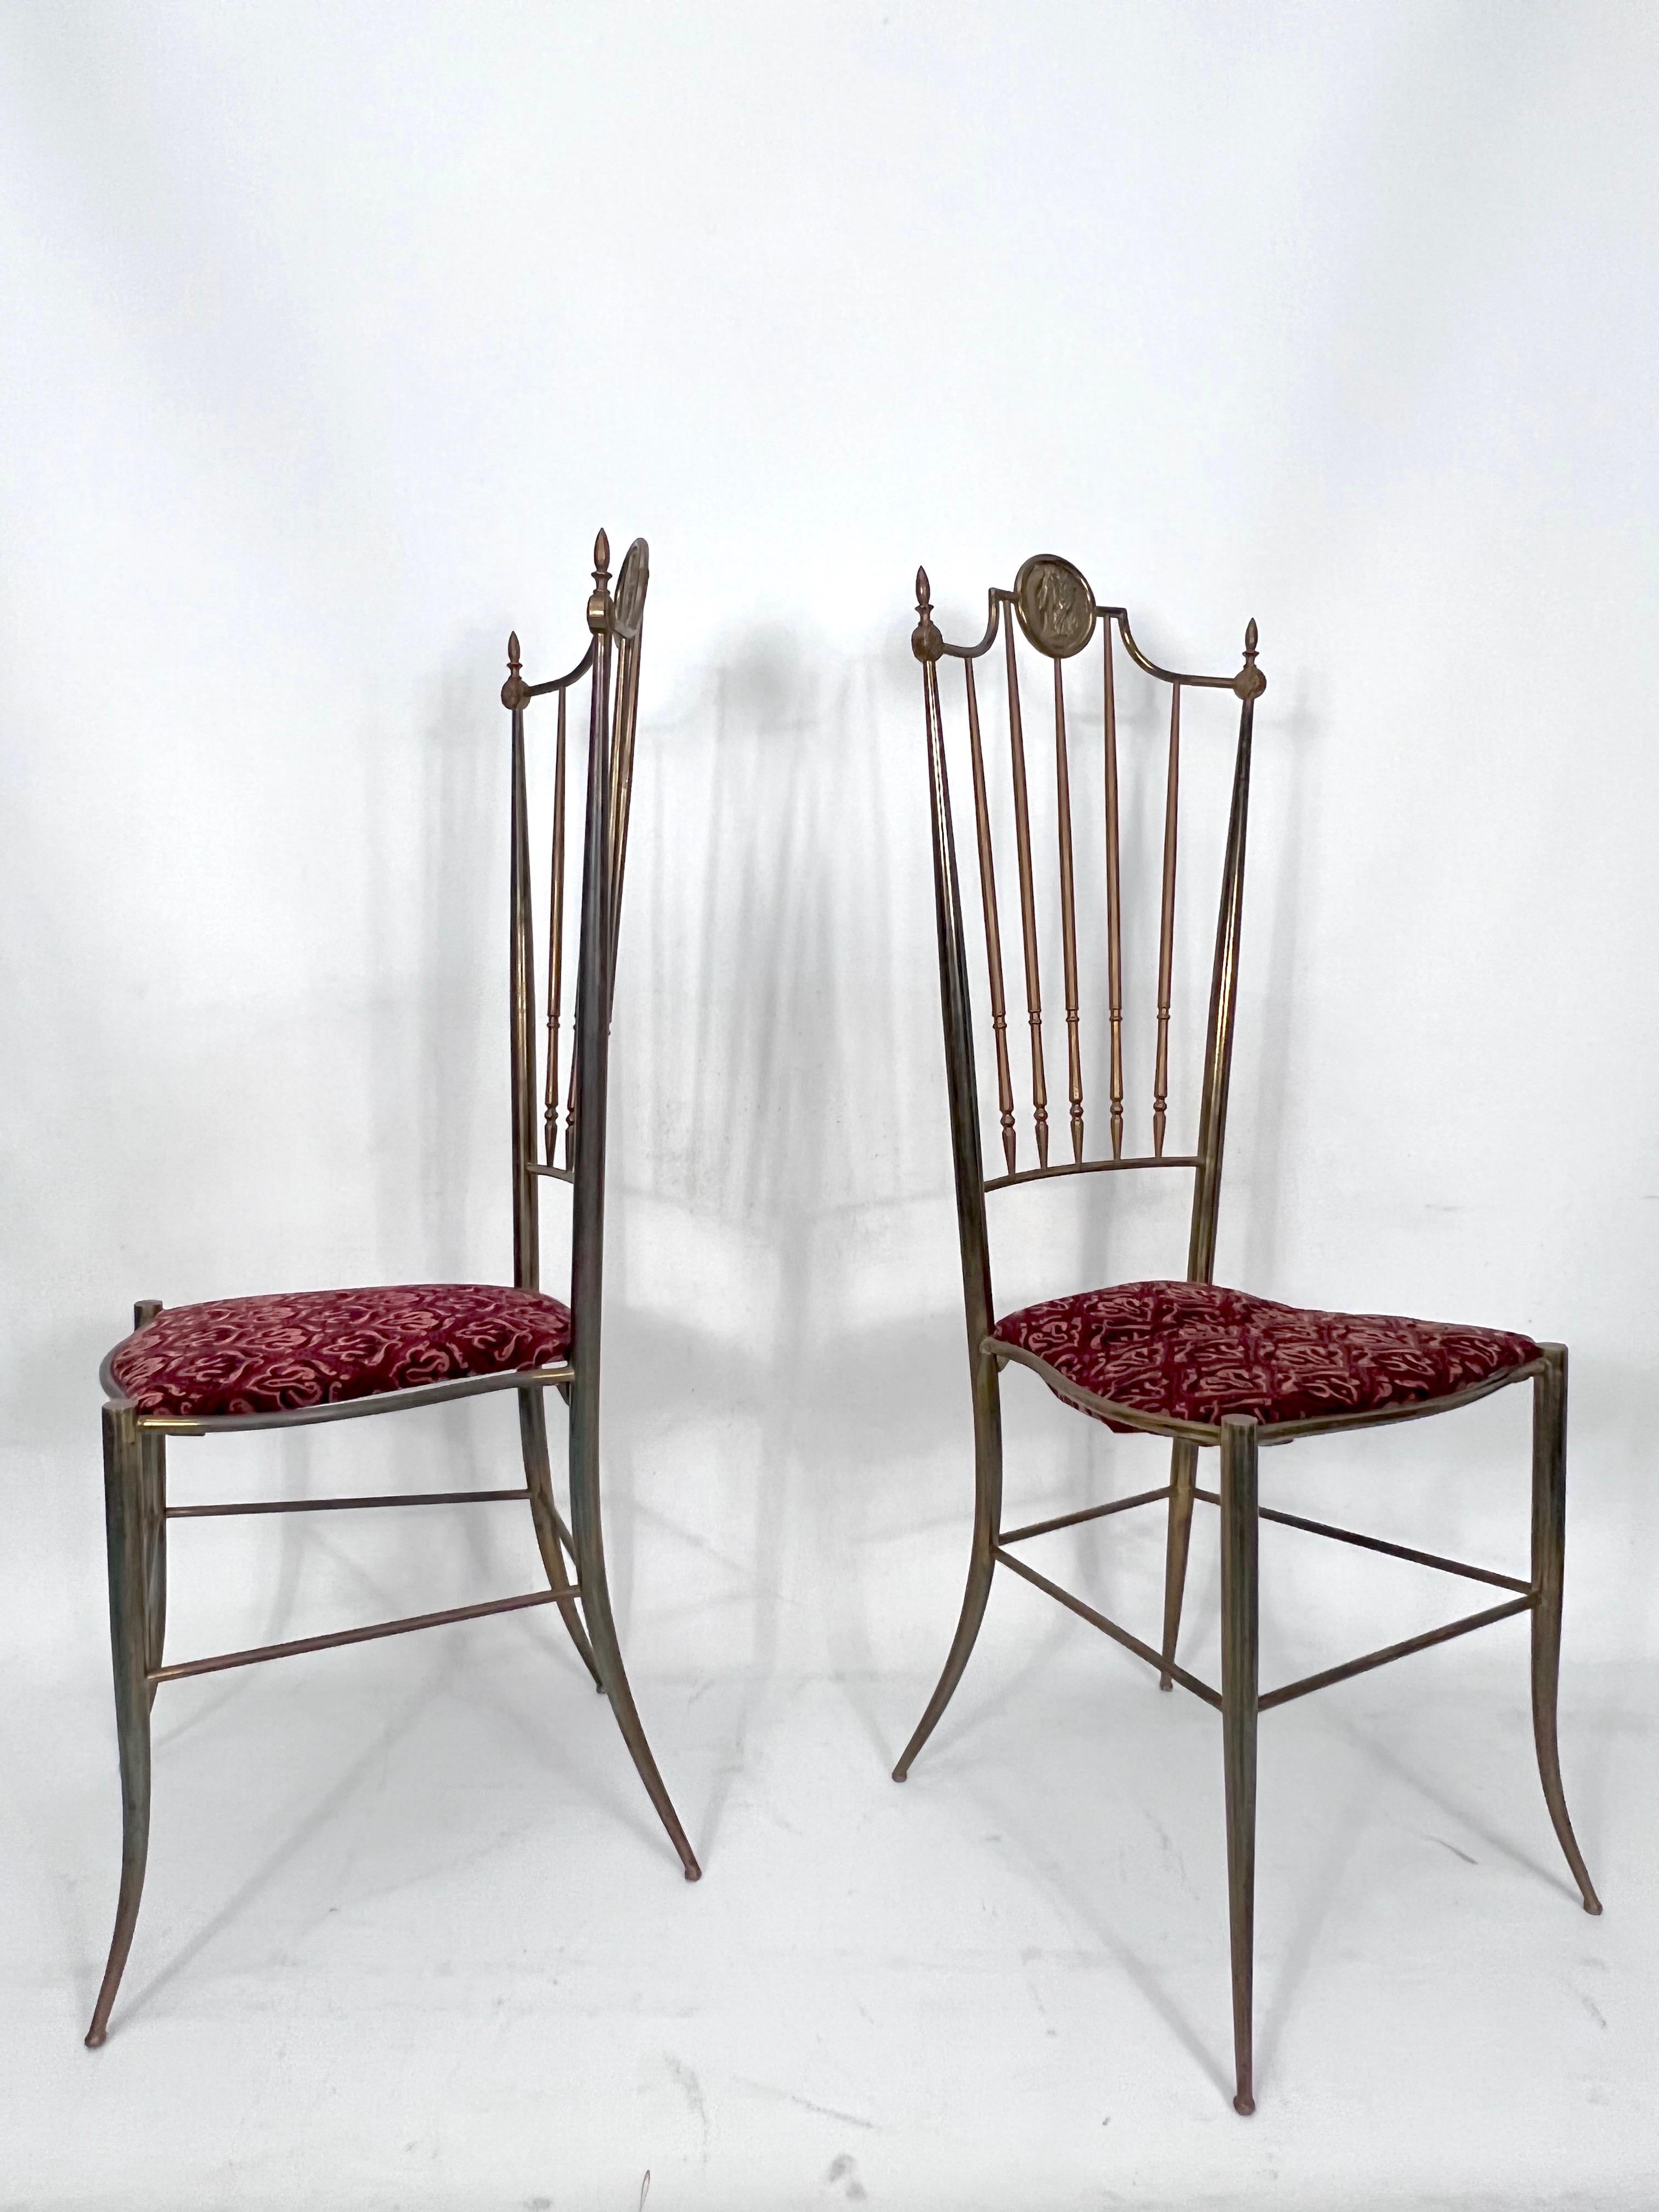 Vintage Pair of Brass Tall Chairs from Chiavari, Italy, 1950s For Sale 1